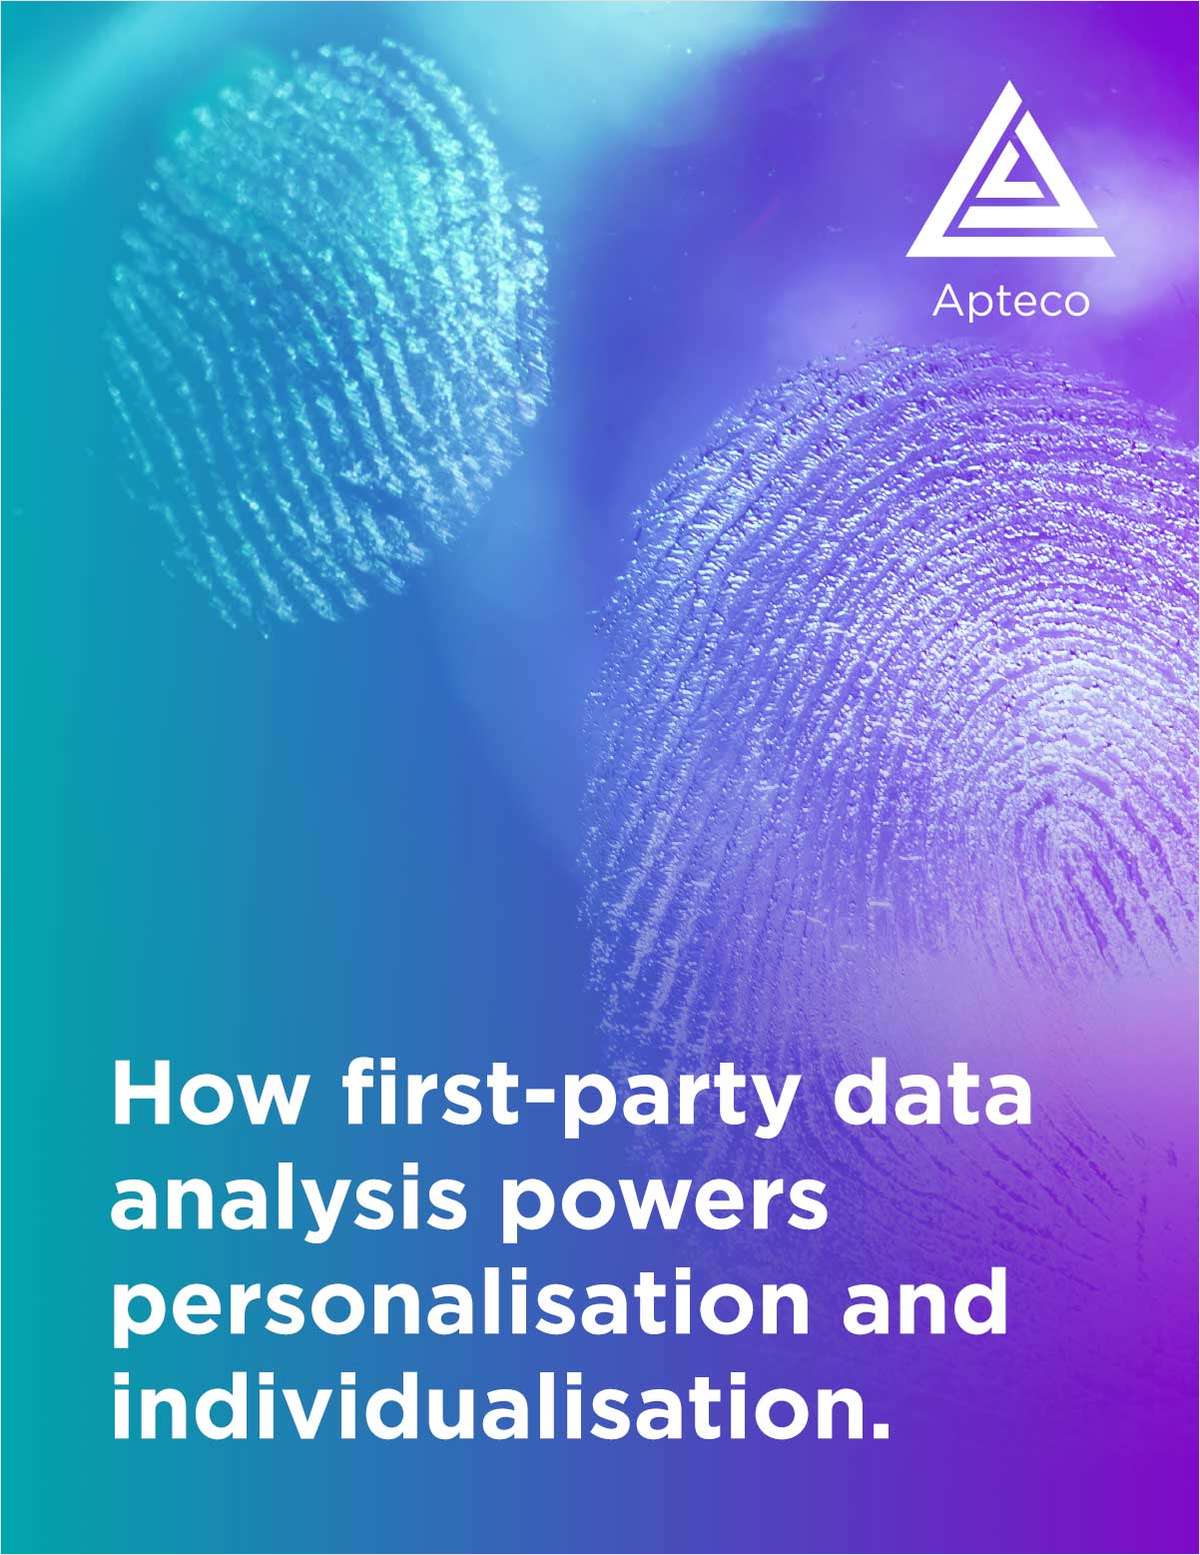 How first-party data analysis powers personalisation and individualisation